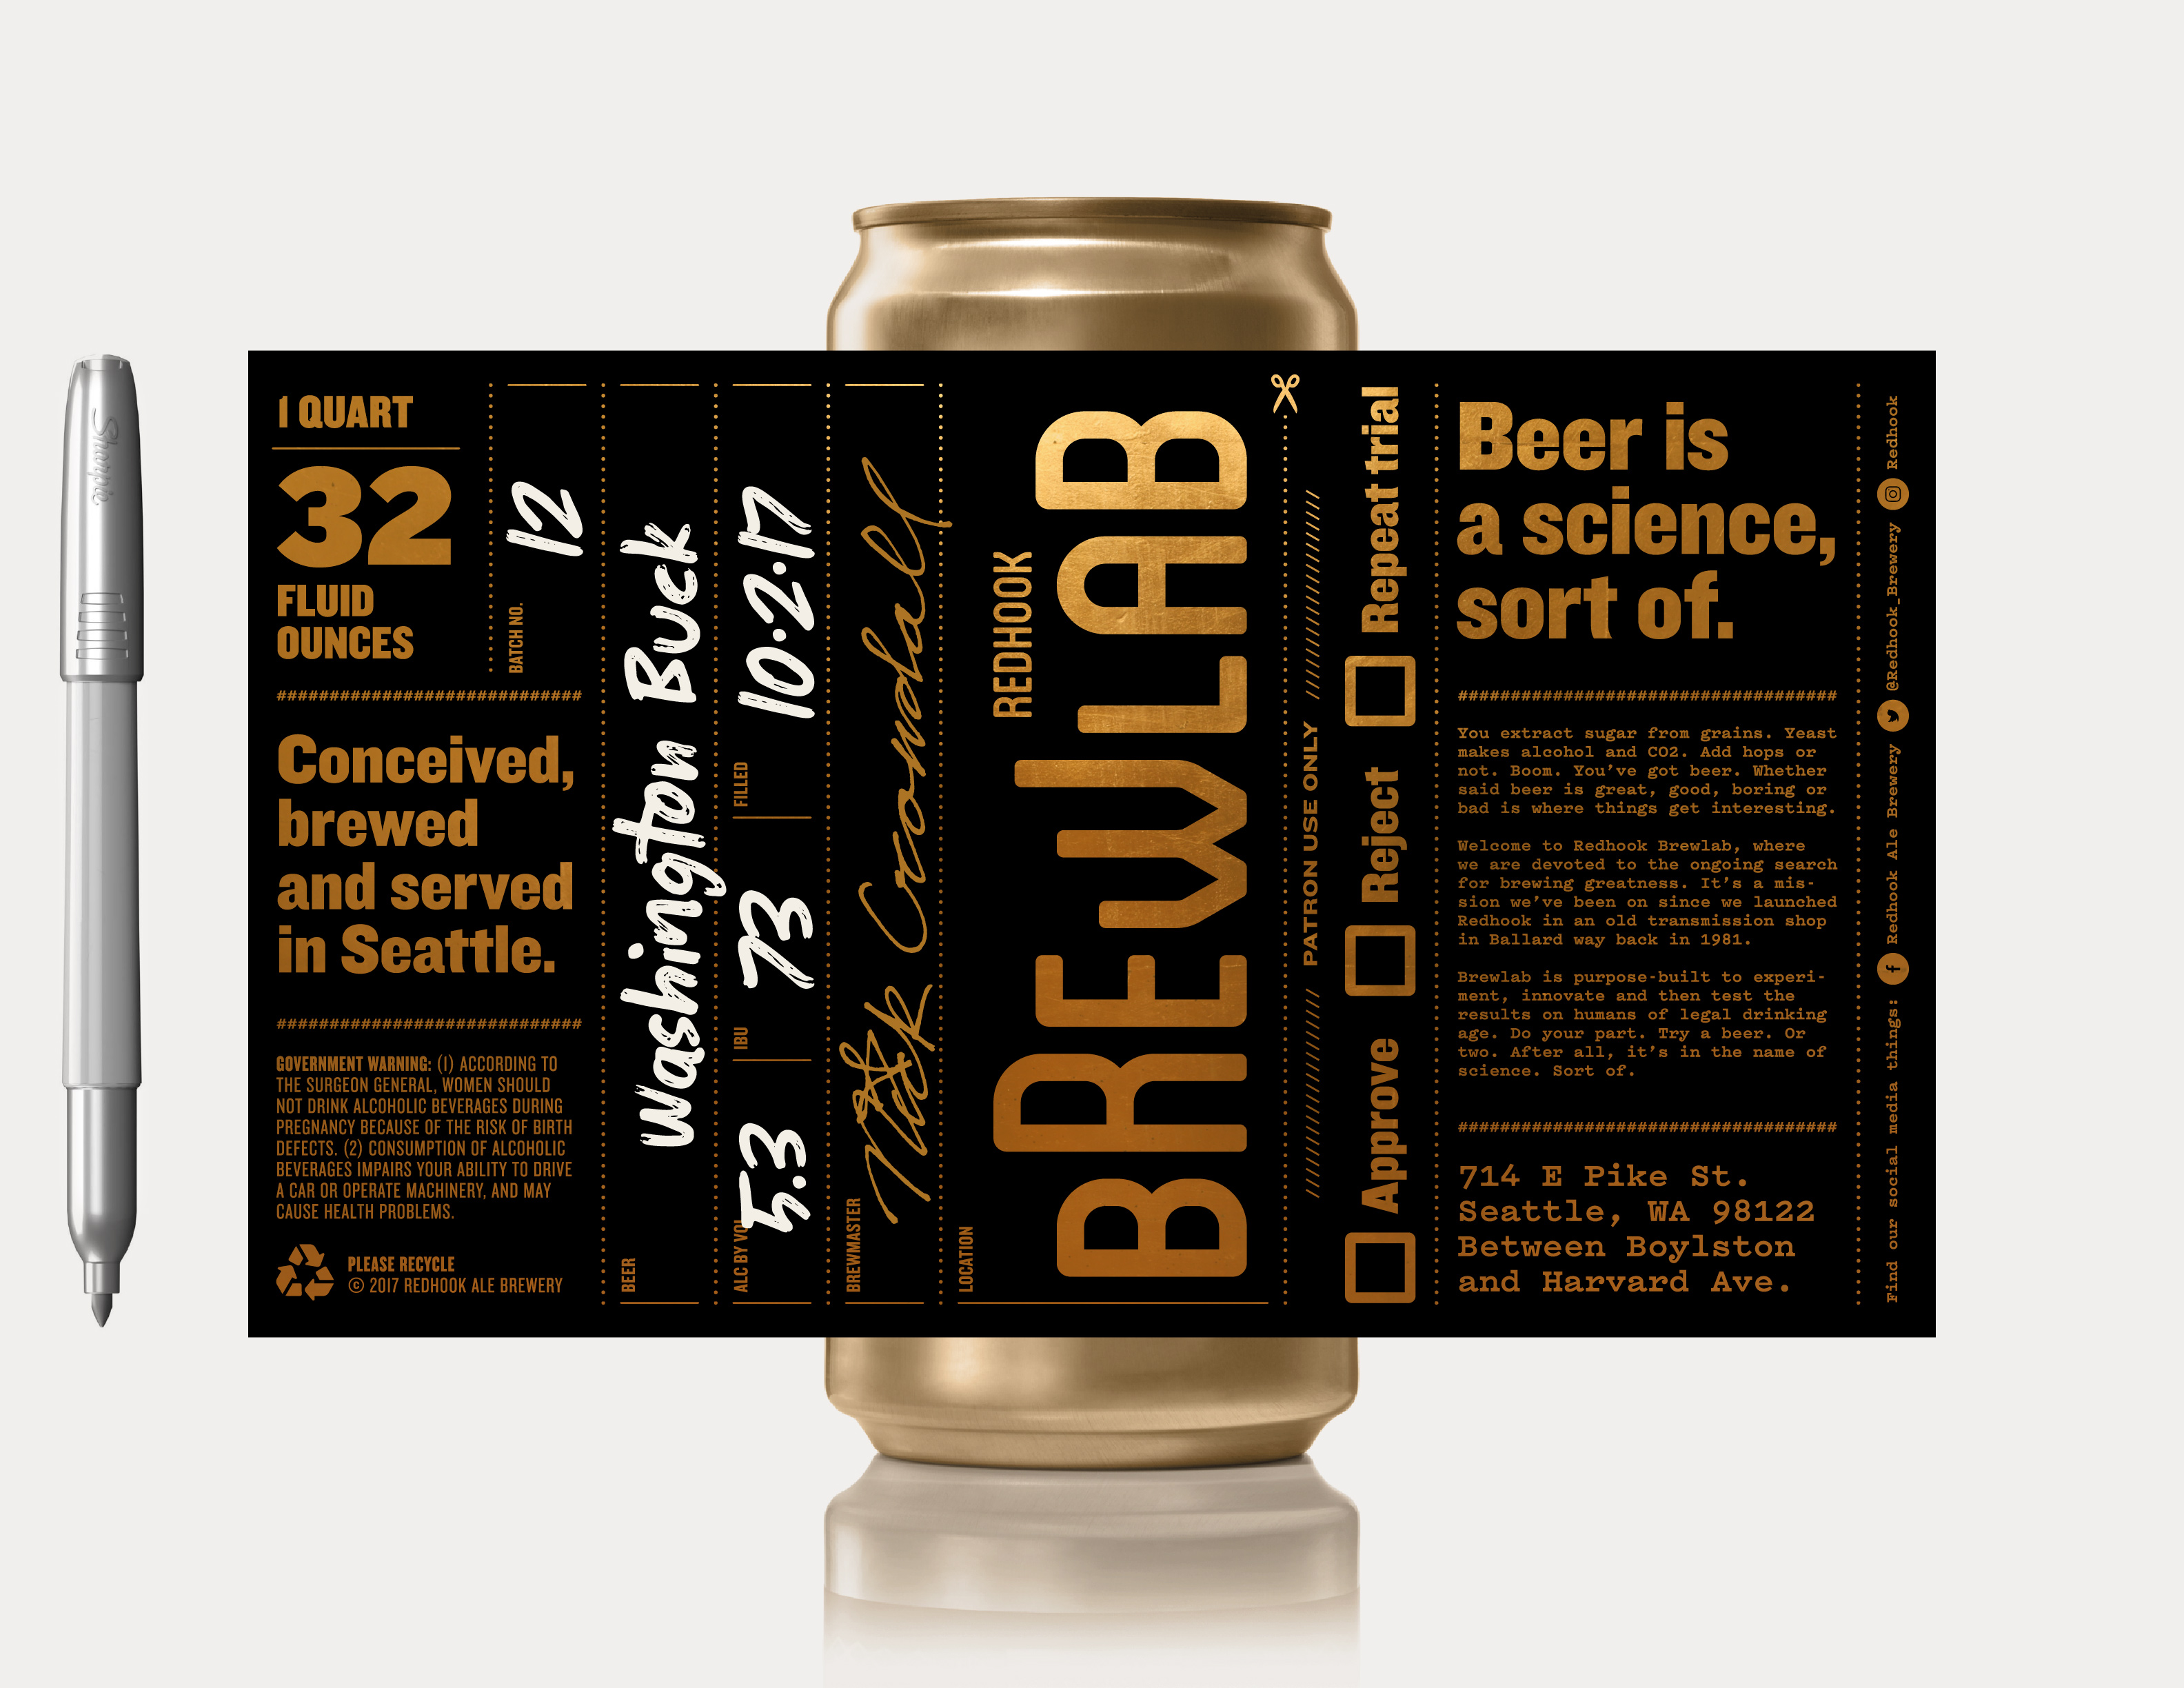 A gold beer can with the black and gold designed brewlab label on a white background. The label is fully rolled out as an image so you can see all the design elements and text that appears on the label. The label is black and the text is gold and white.